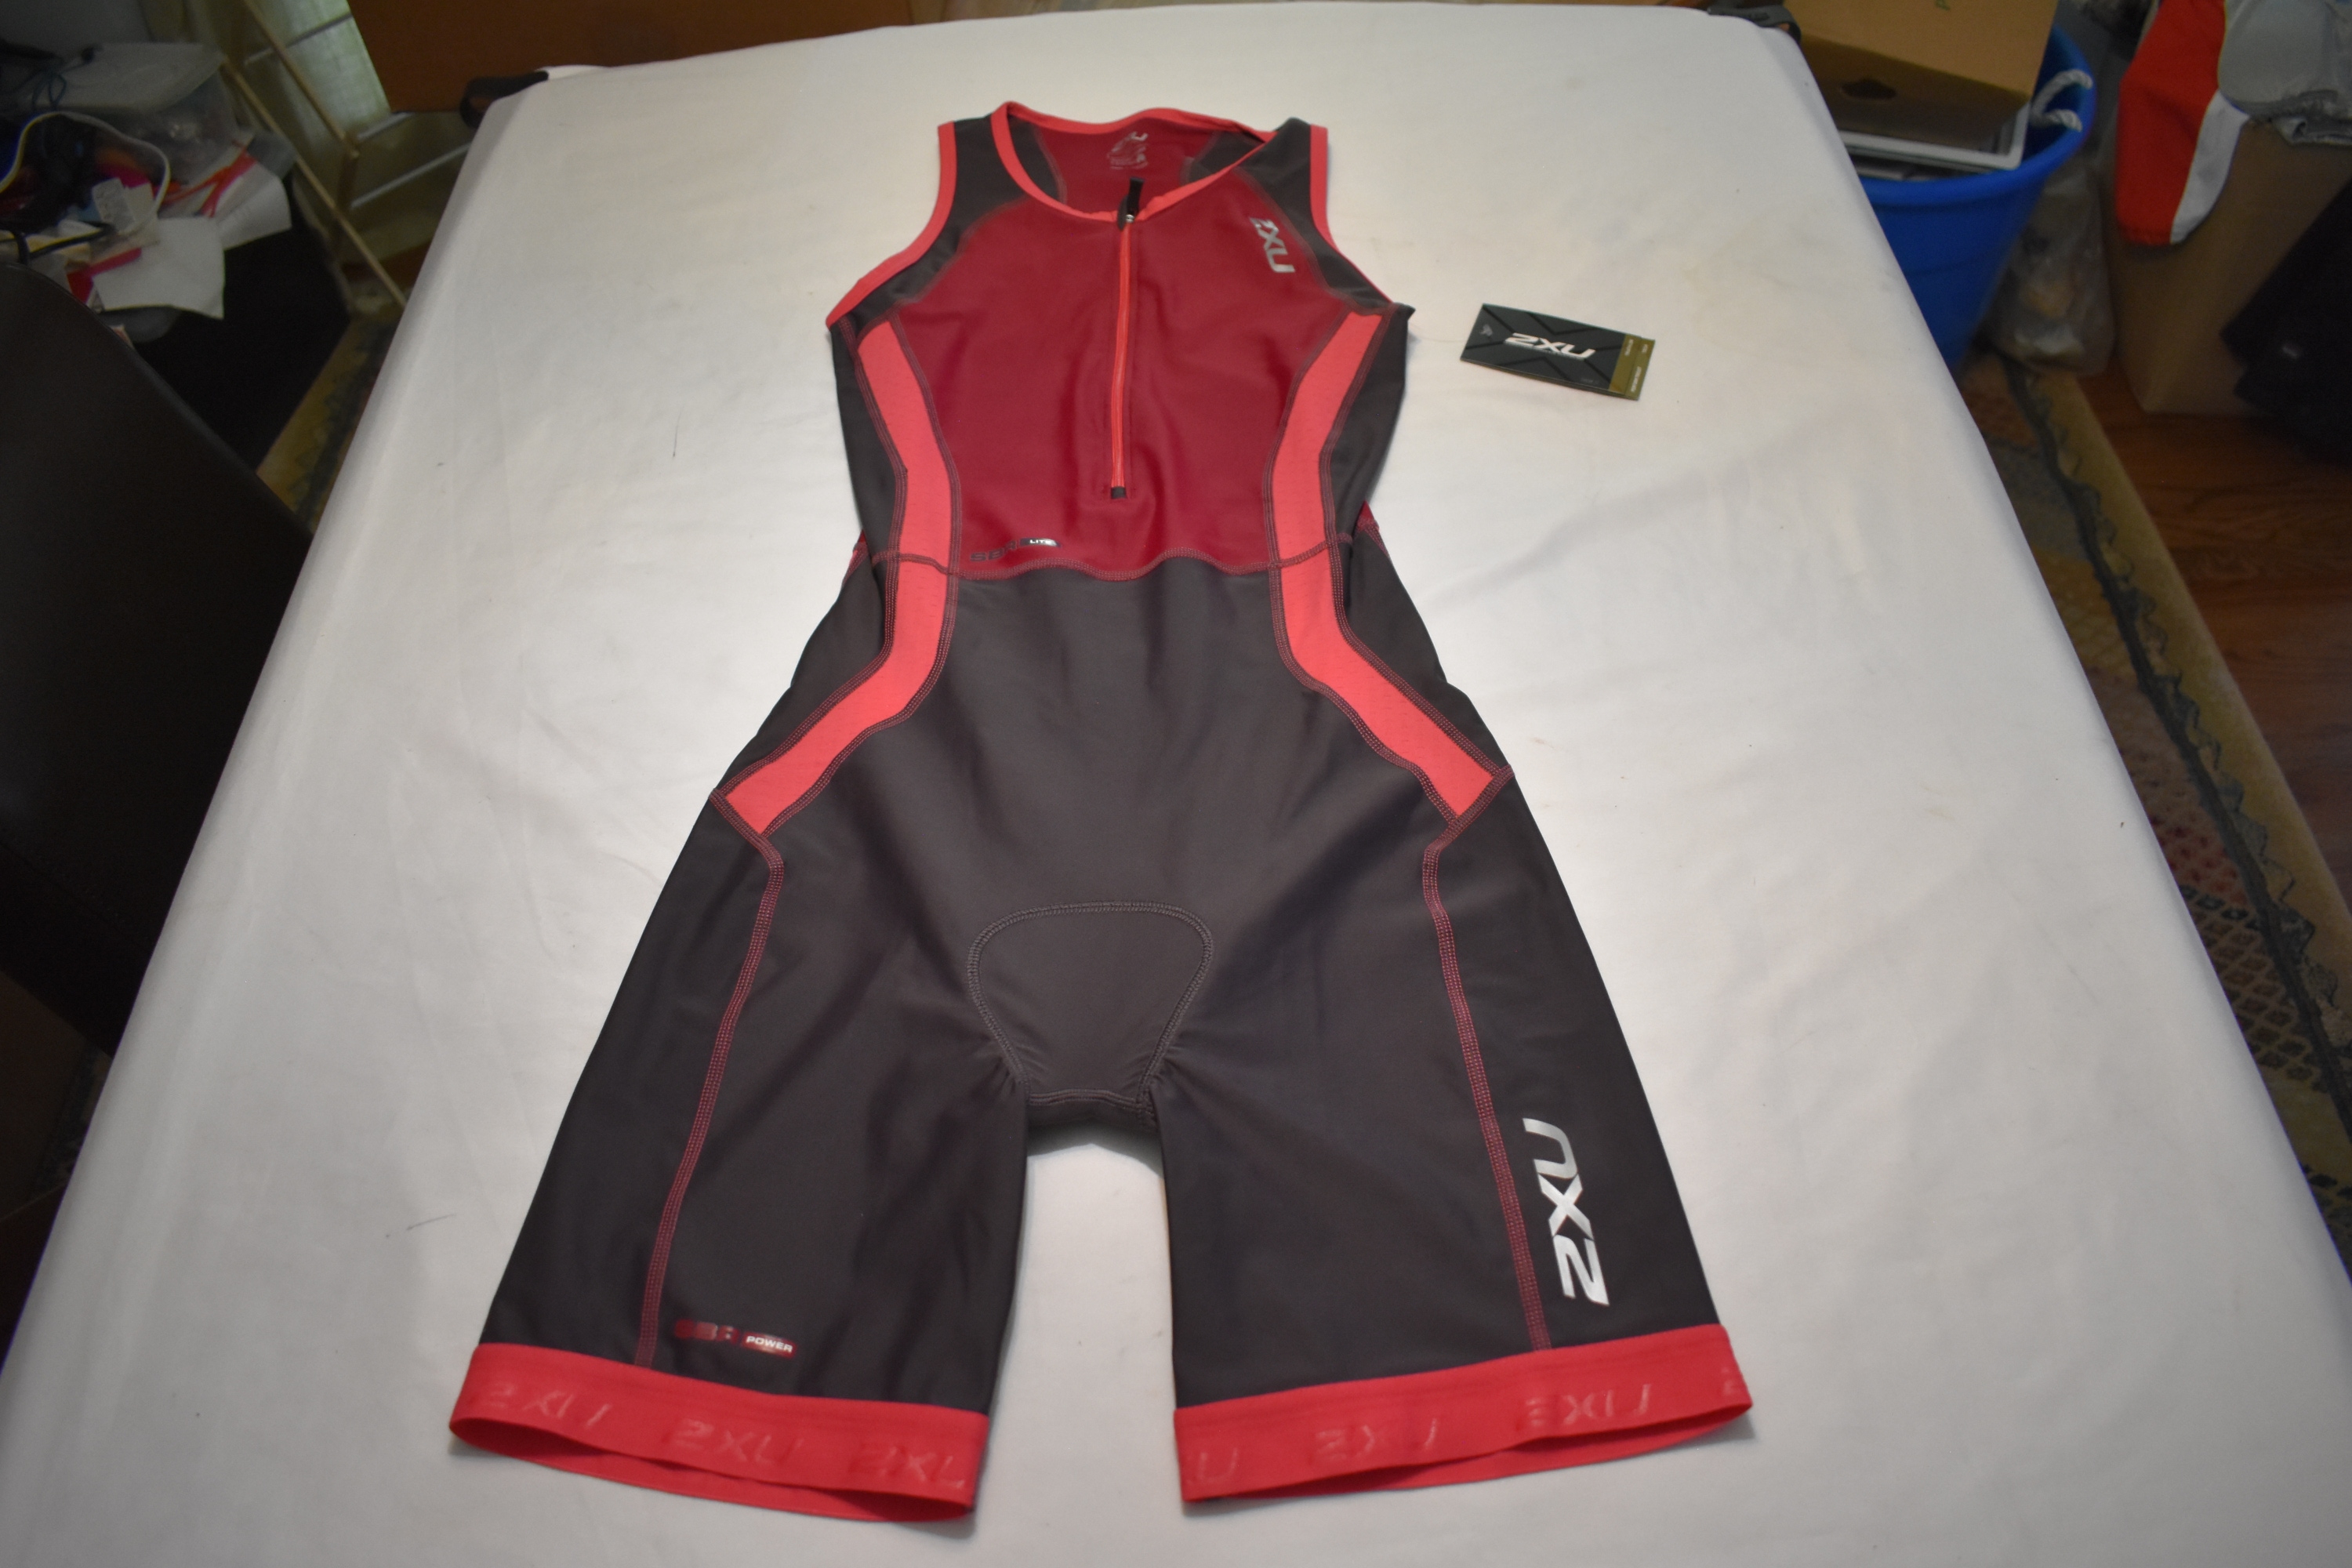 NEW - 2XU Triathlon Tech Performance Suit, Black/Red, Adult Small - With Tags!